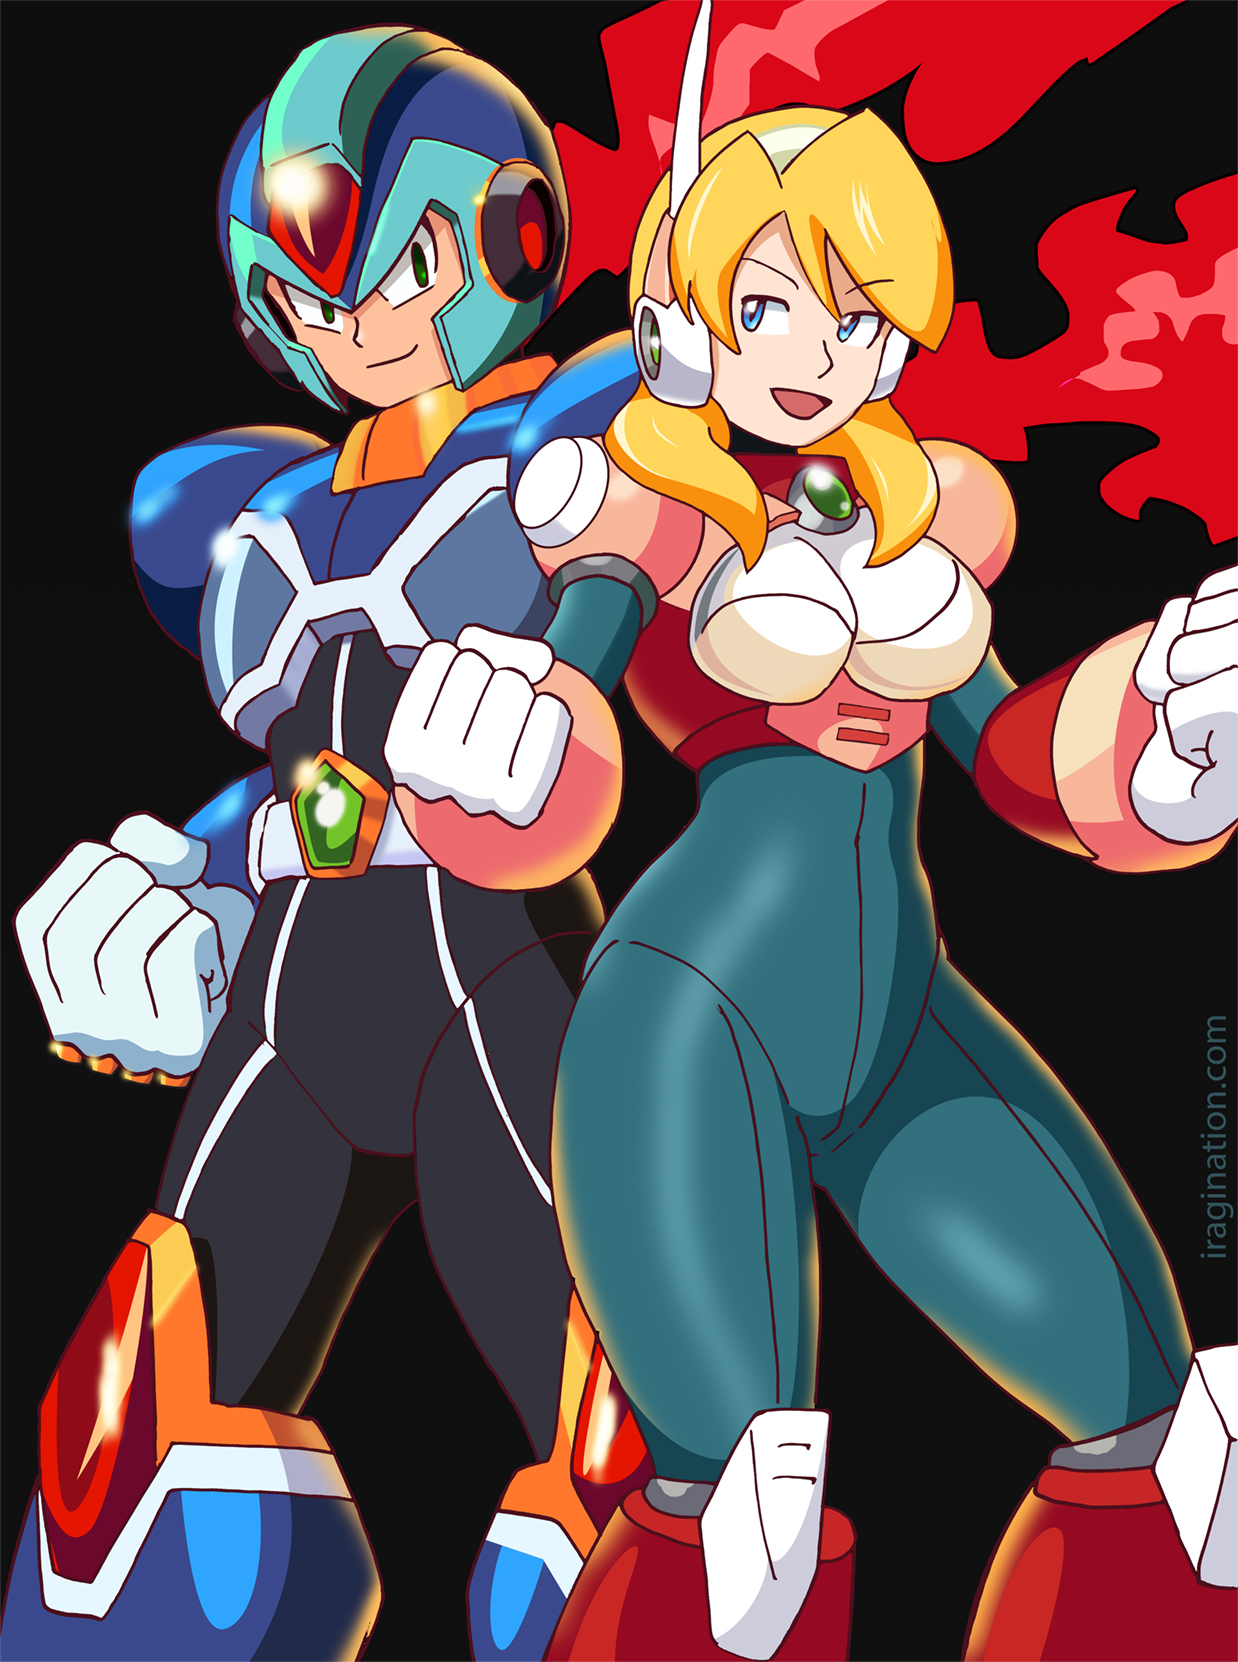 X and Alia - Rockman X Dive
I have been hearing about [url=http://rxd.capcom.com.tw/]Rockman X Dive[/url] for a while, a new game developed for mobile devices. I am really liking the new artwork that has been released to promote the game. 

From the [url=https://www.facebook.com/CAPCOM.RXD/]official Facebook page[/url], recently they shared a post with [url=https://www.facebook.com/CAPCOM.RXD/posts/360393281323434]Alia's new 3D model[/url]. I gave up, time was right, so I started sketching around and this is the result. Playable Alia after so many years. No idea how the game will be plot-wise or if we will see any major character development, but it is good to see X on his Command Mission armor side to side with Alia's design from Mega Man X8. 

Hopefully we get to see some fun interactions!
Keywords: x alia rockman_x_dive